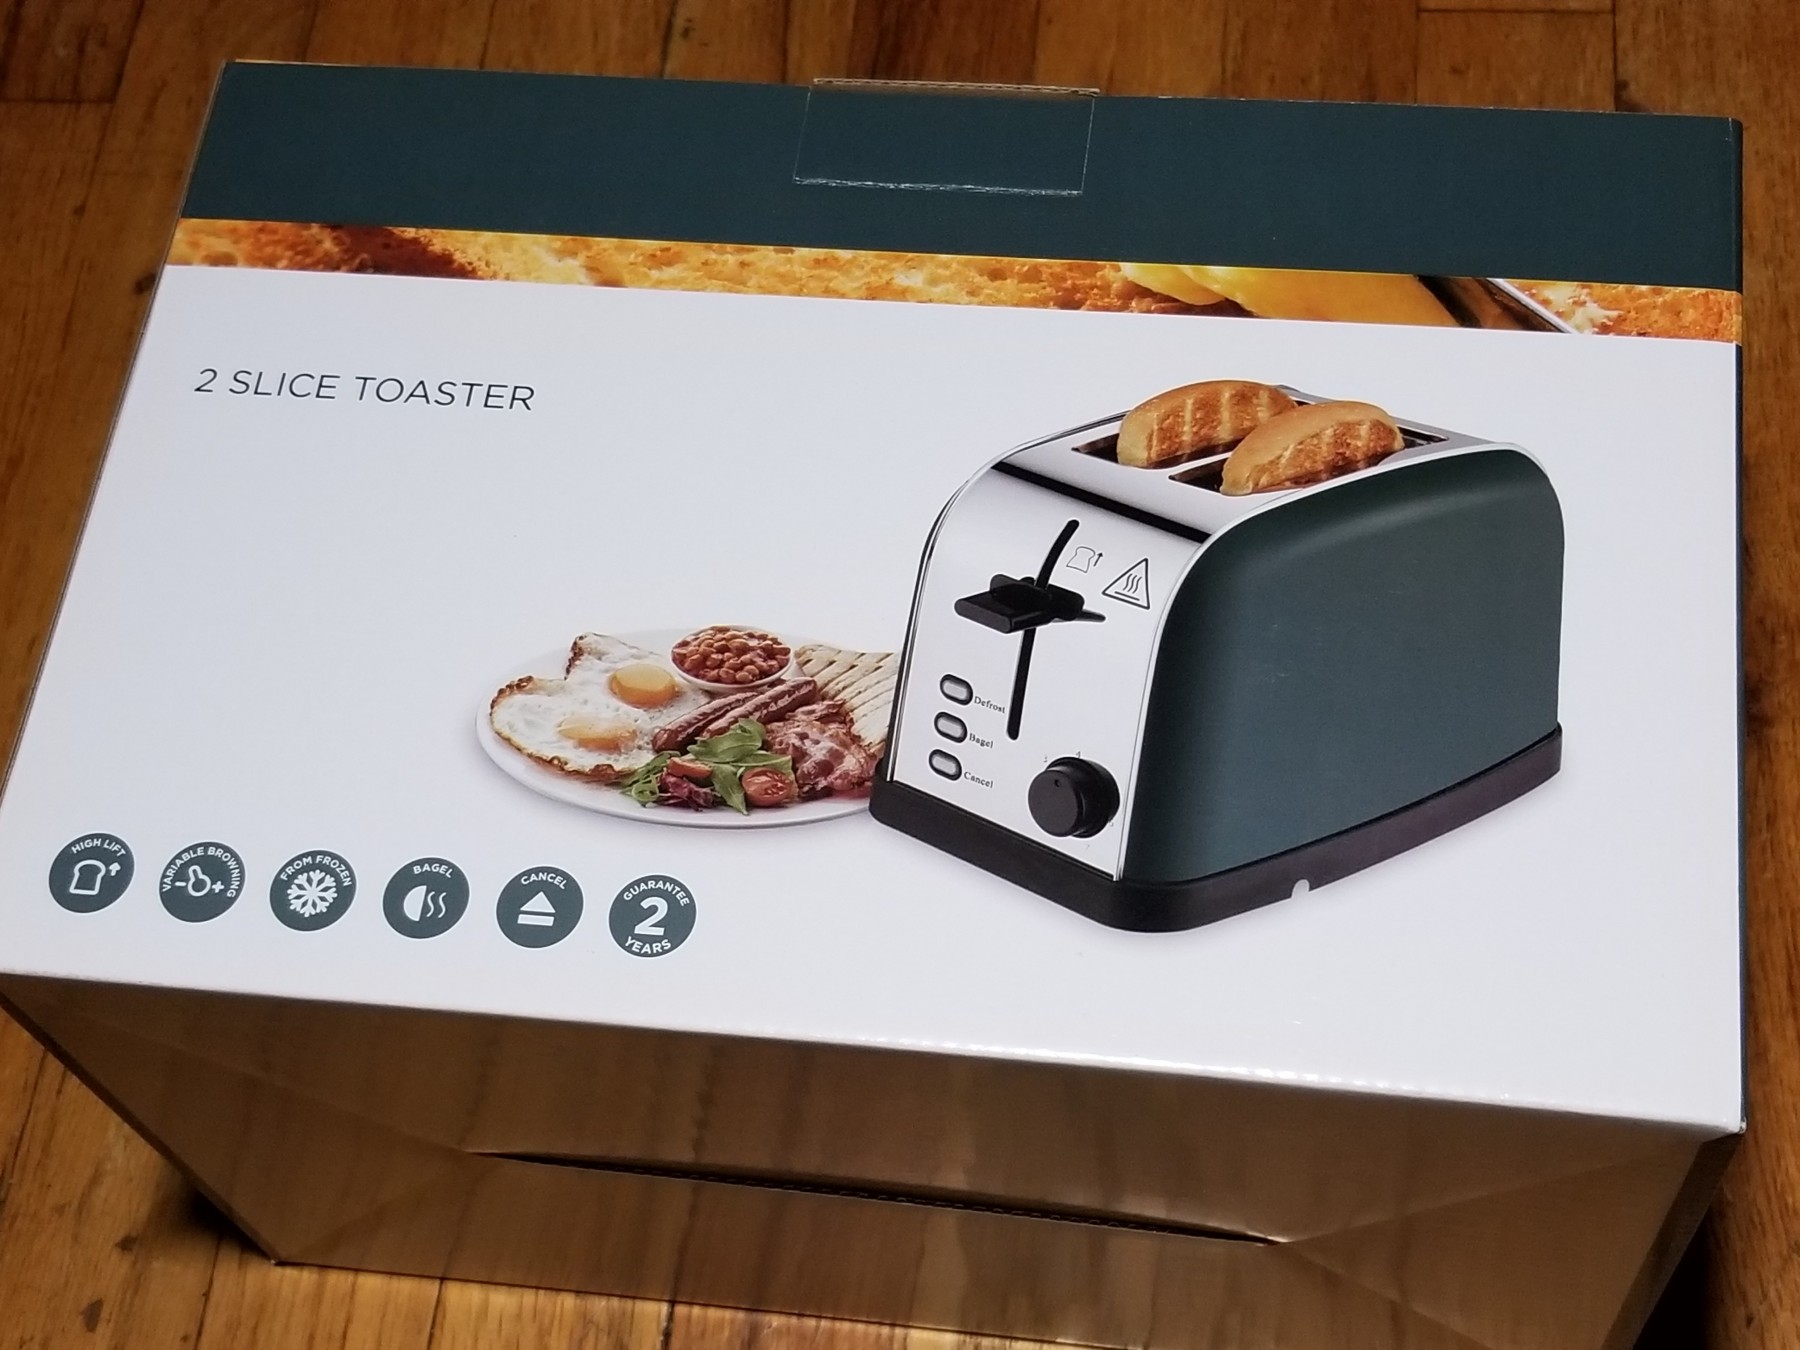 A nice toaster with features such as wide slots to fit bagels and defrost function!